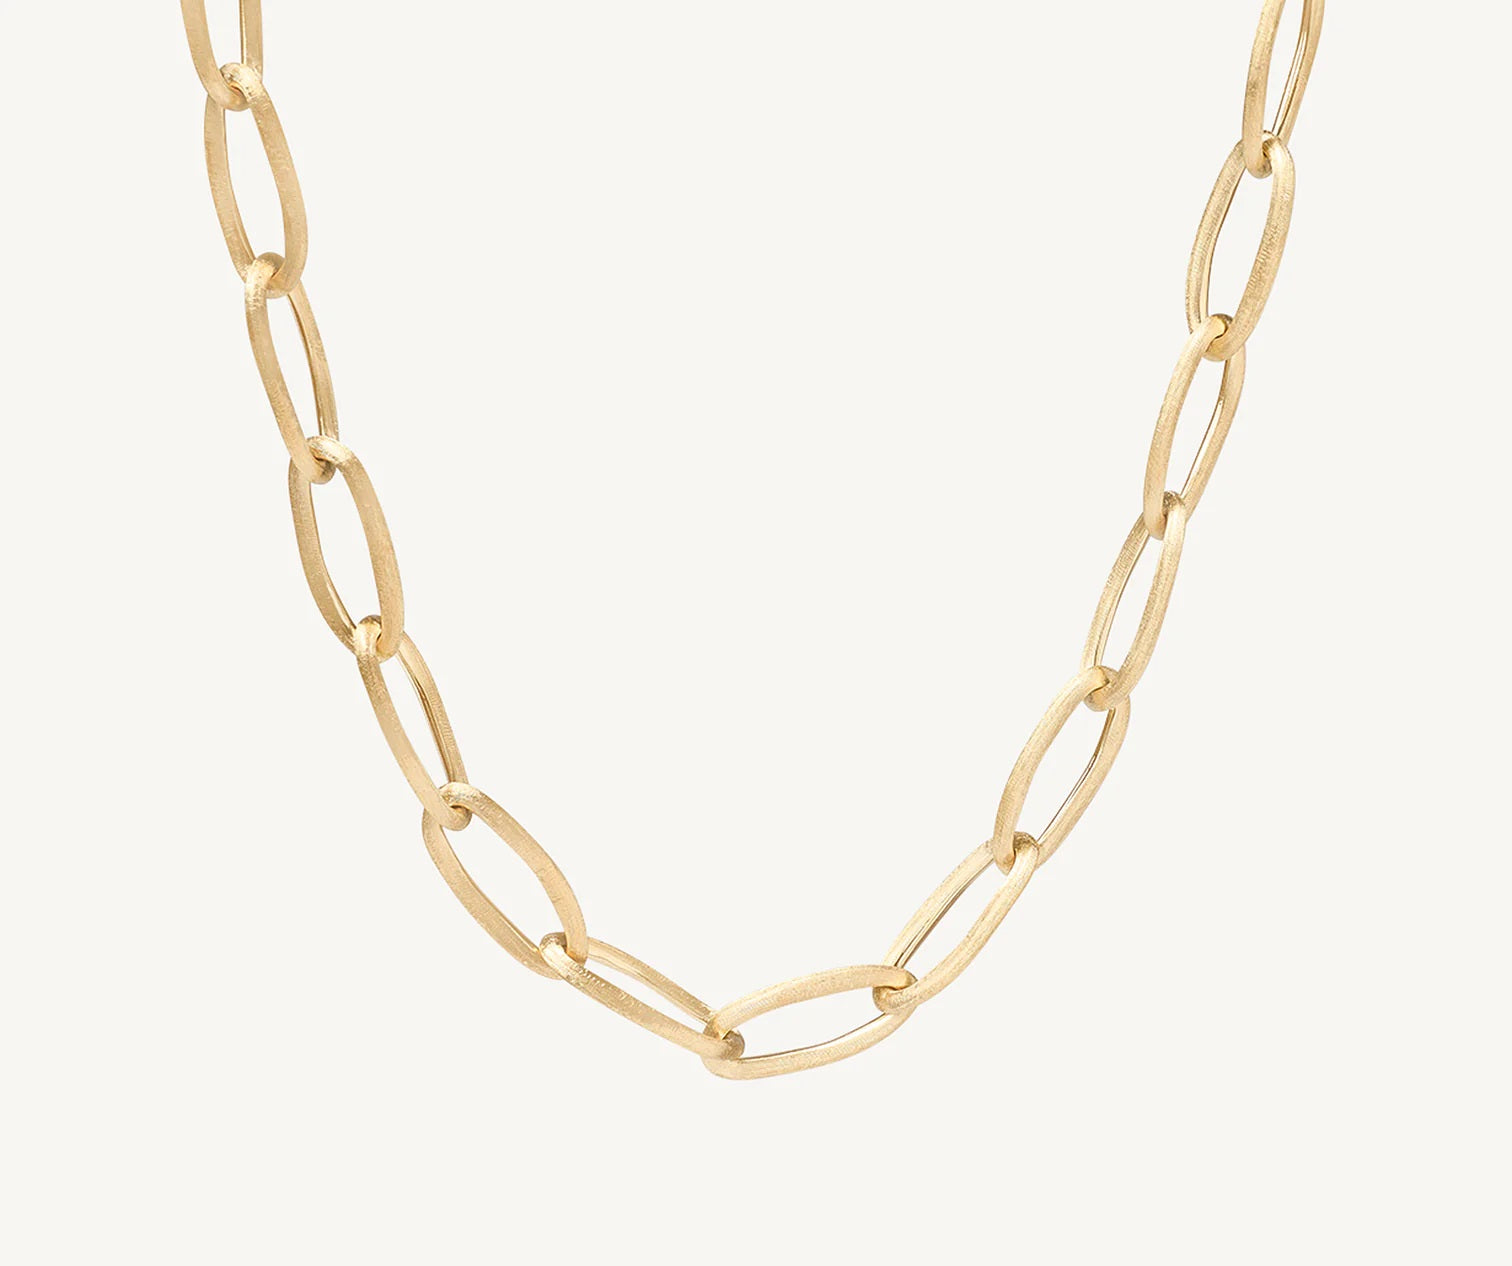 18K YELLOW GOLD OVAL LINK NECKLACE FROM THE JAIPUR GOLD COLLECTION